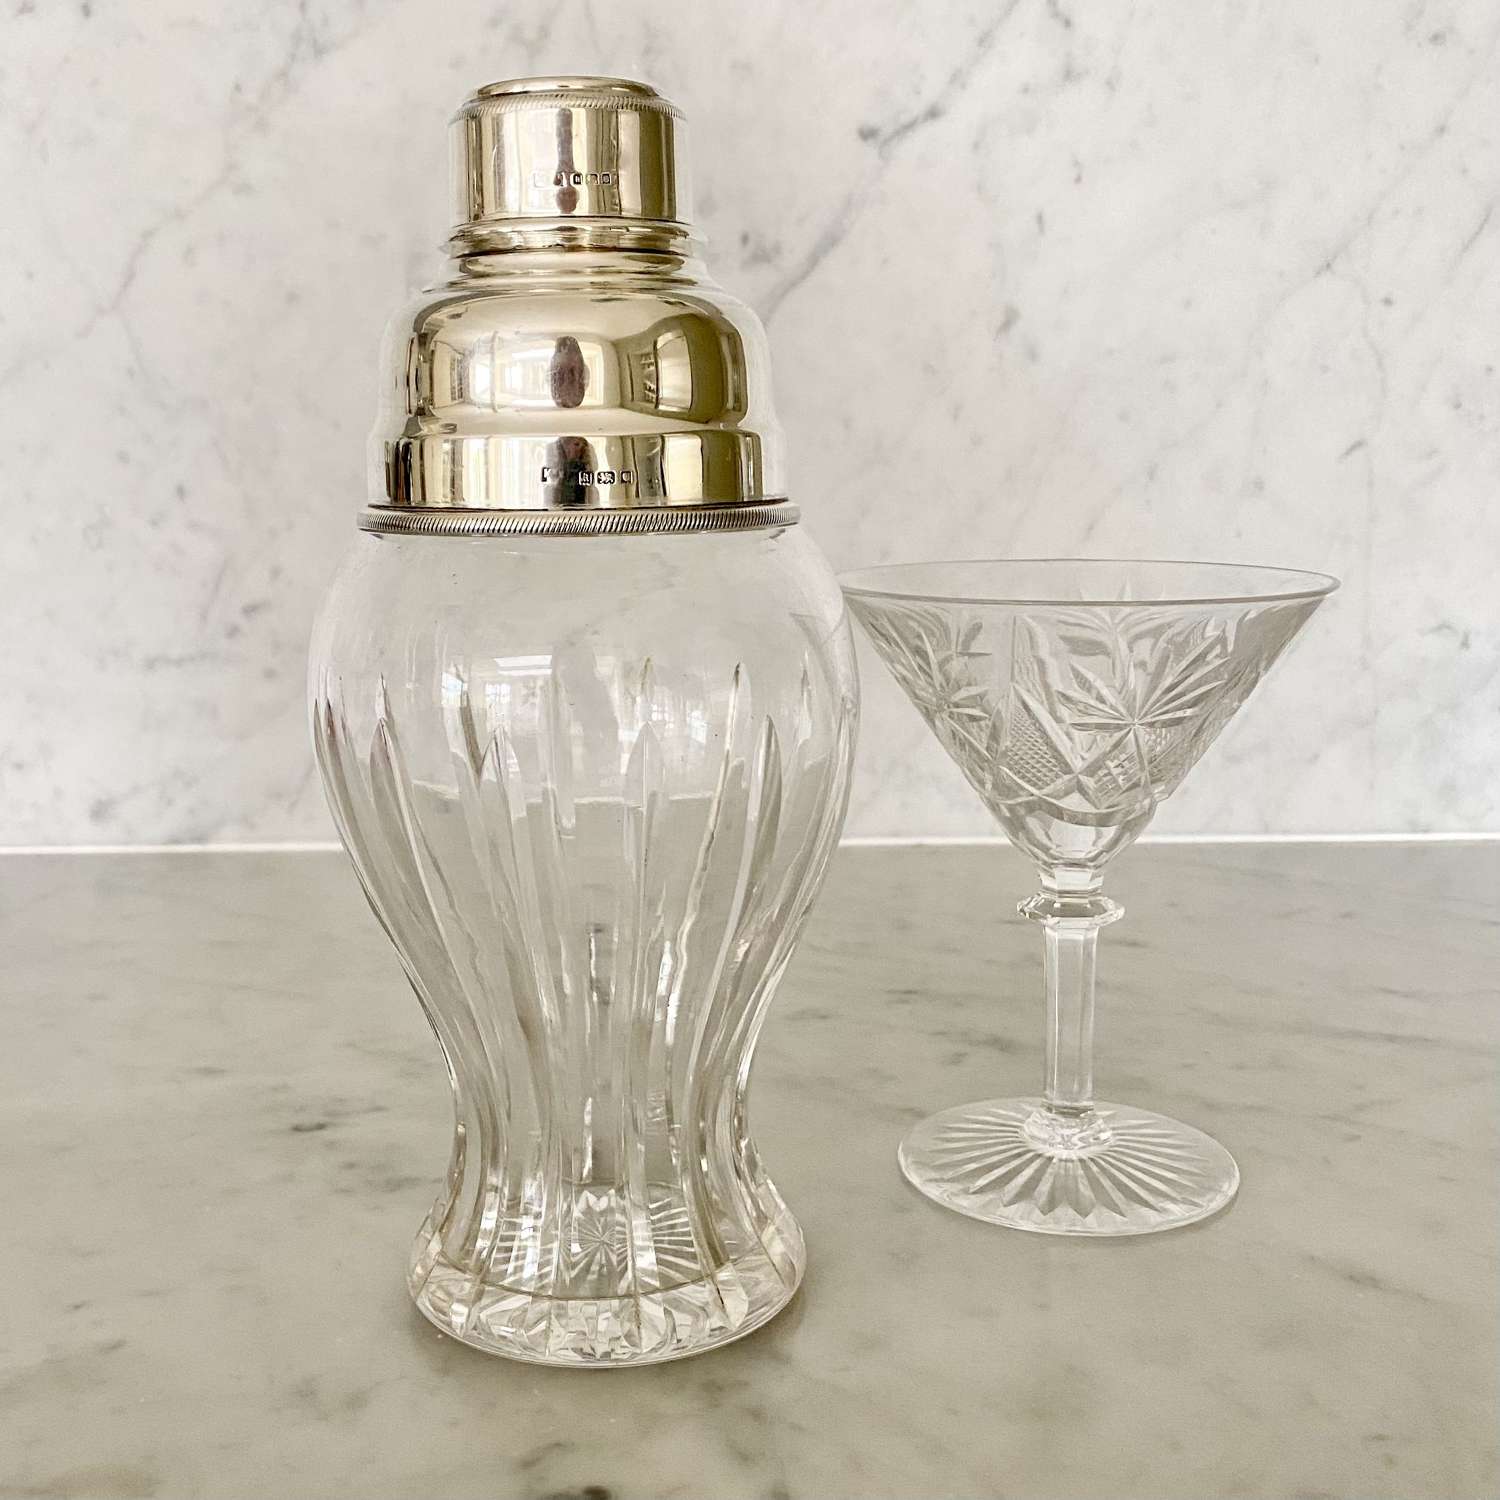 Art Deco sterling silver & glass cocktail shaker by Mappin & Webb 1925